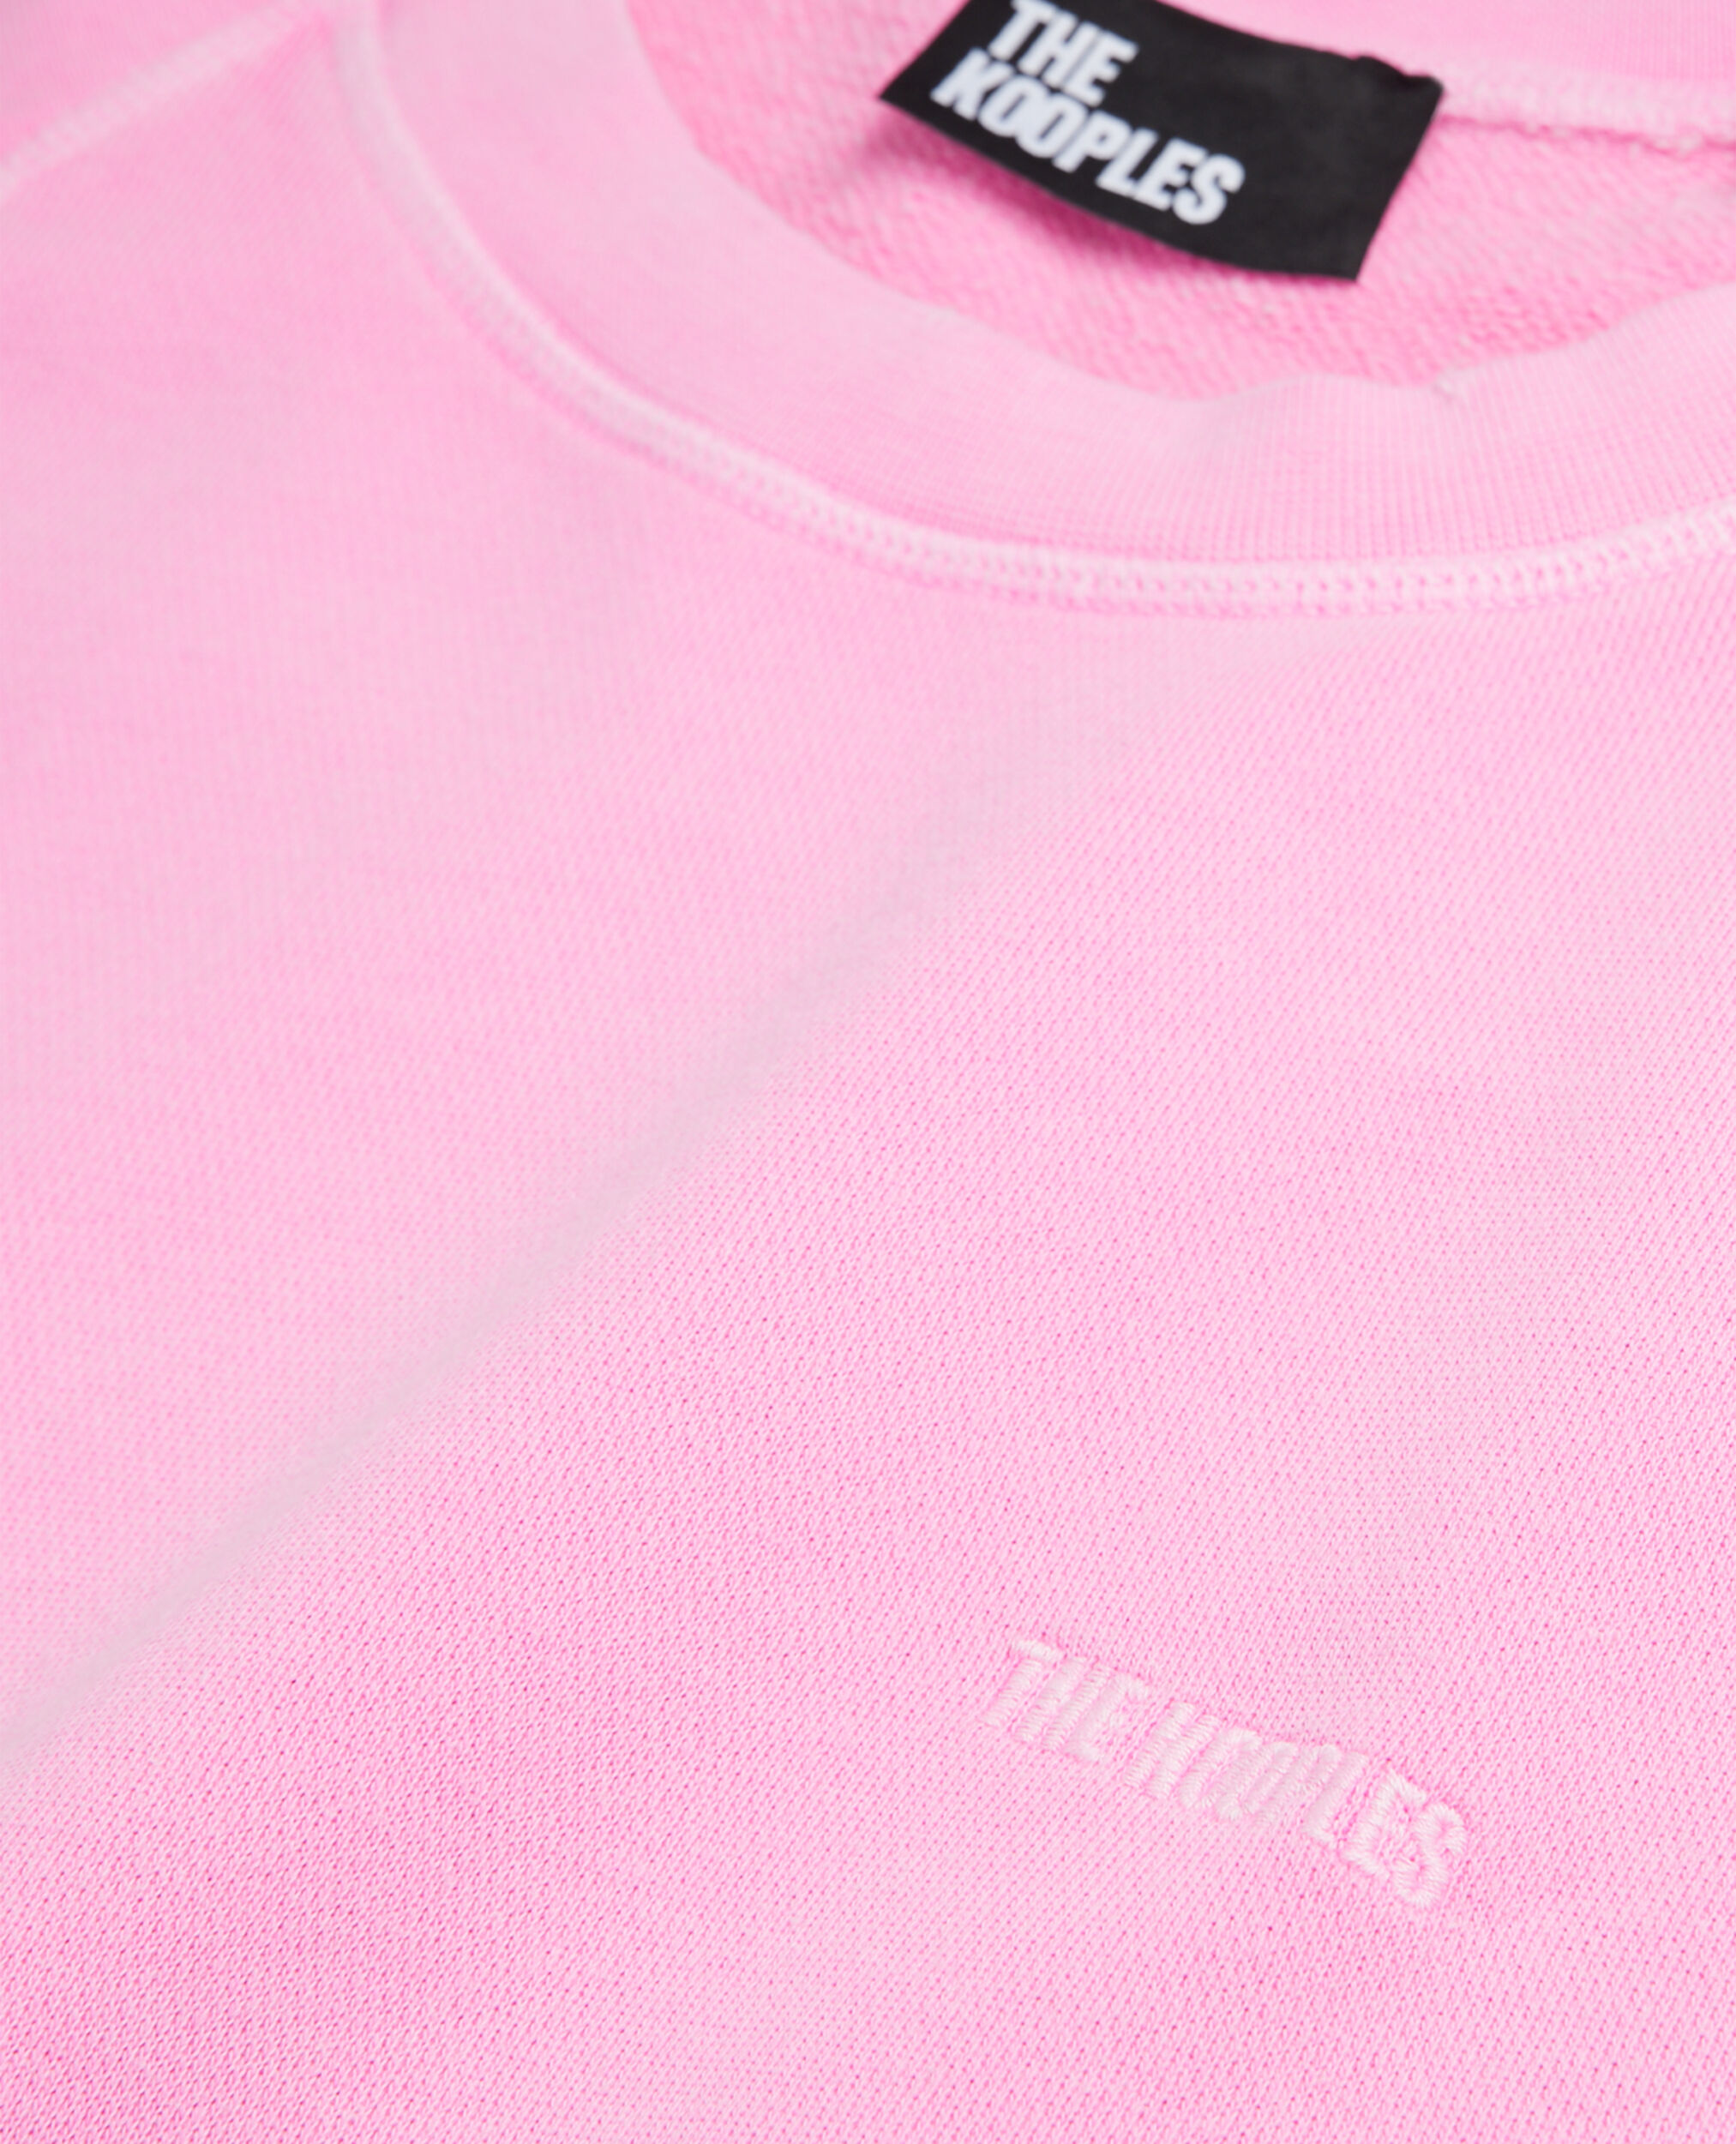 Fluorescent pink sweatshirt with logo, FLUO PINK, hi-res image number null